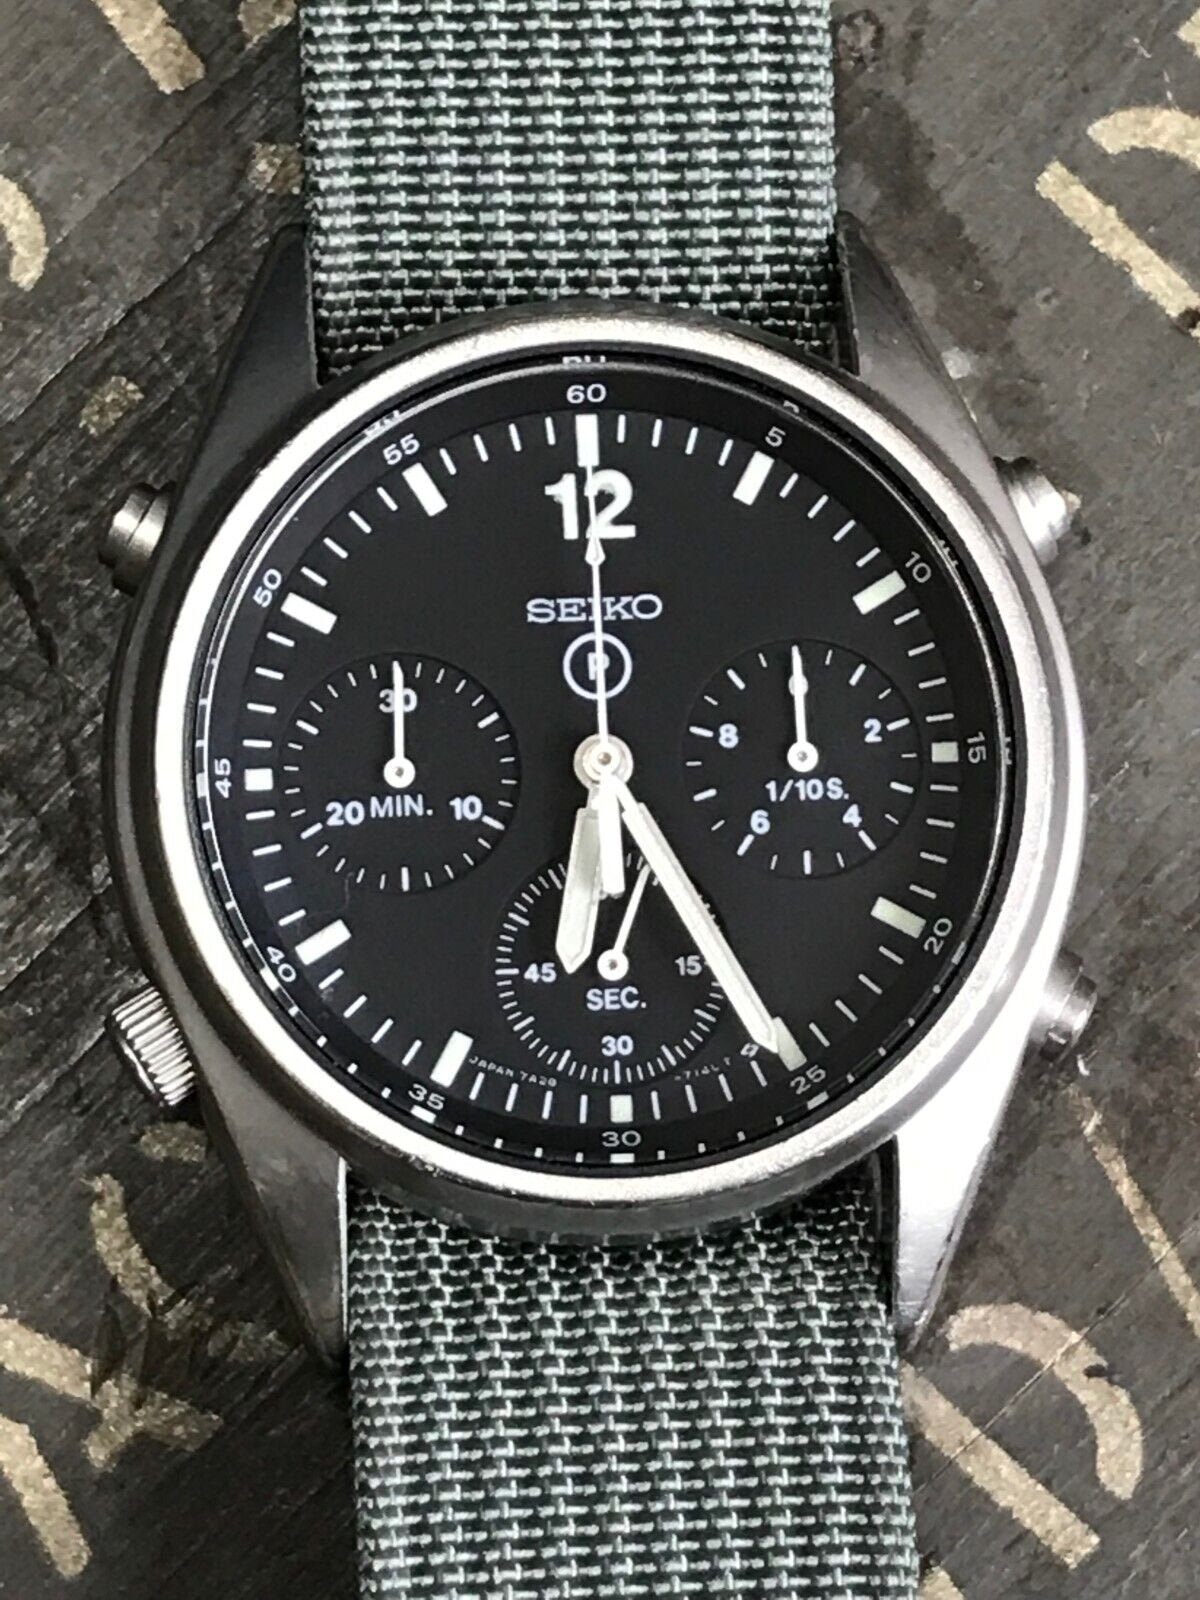 Looking for Owner's Guide for Seiko 7A28-7120 RAF () Chronograph and  Original Band | WatchUSeek Watch Forums